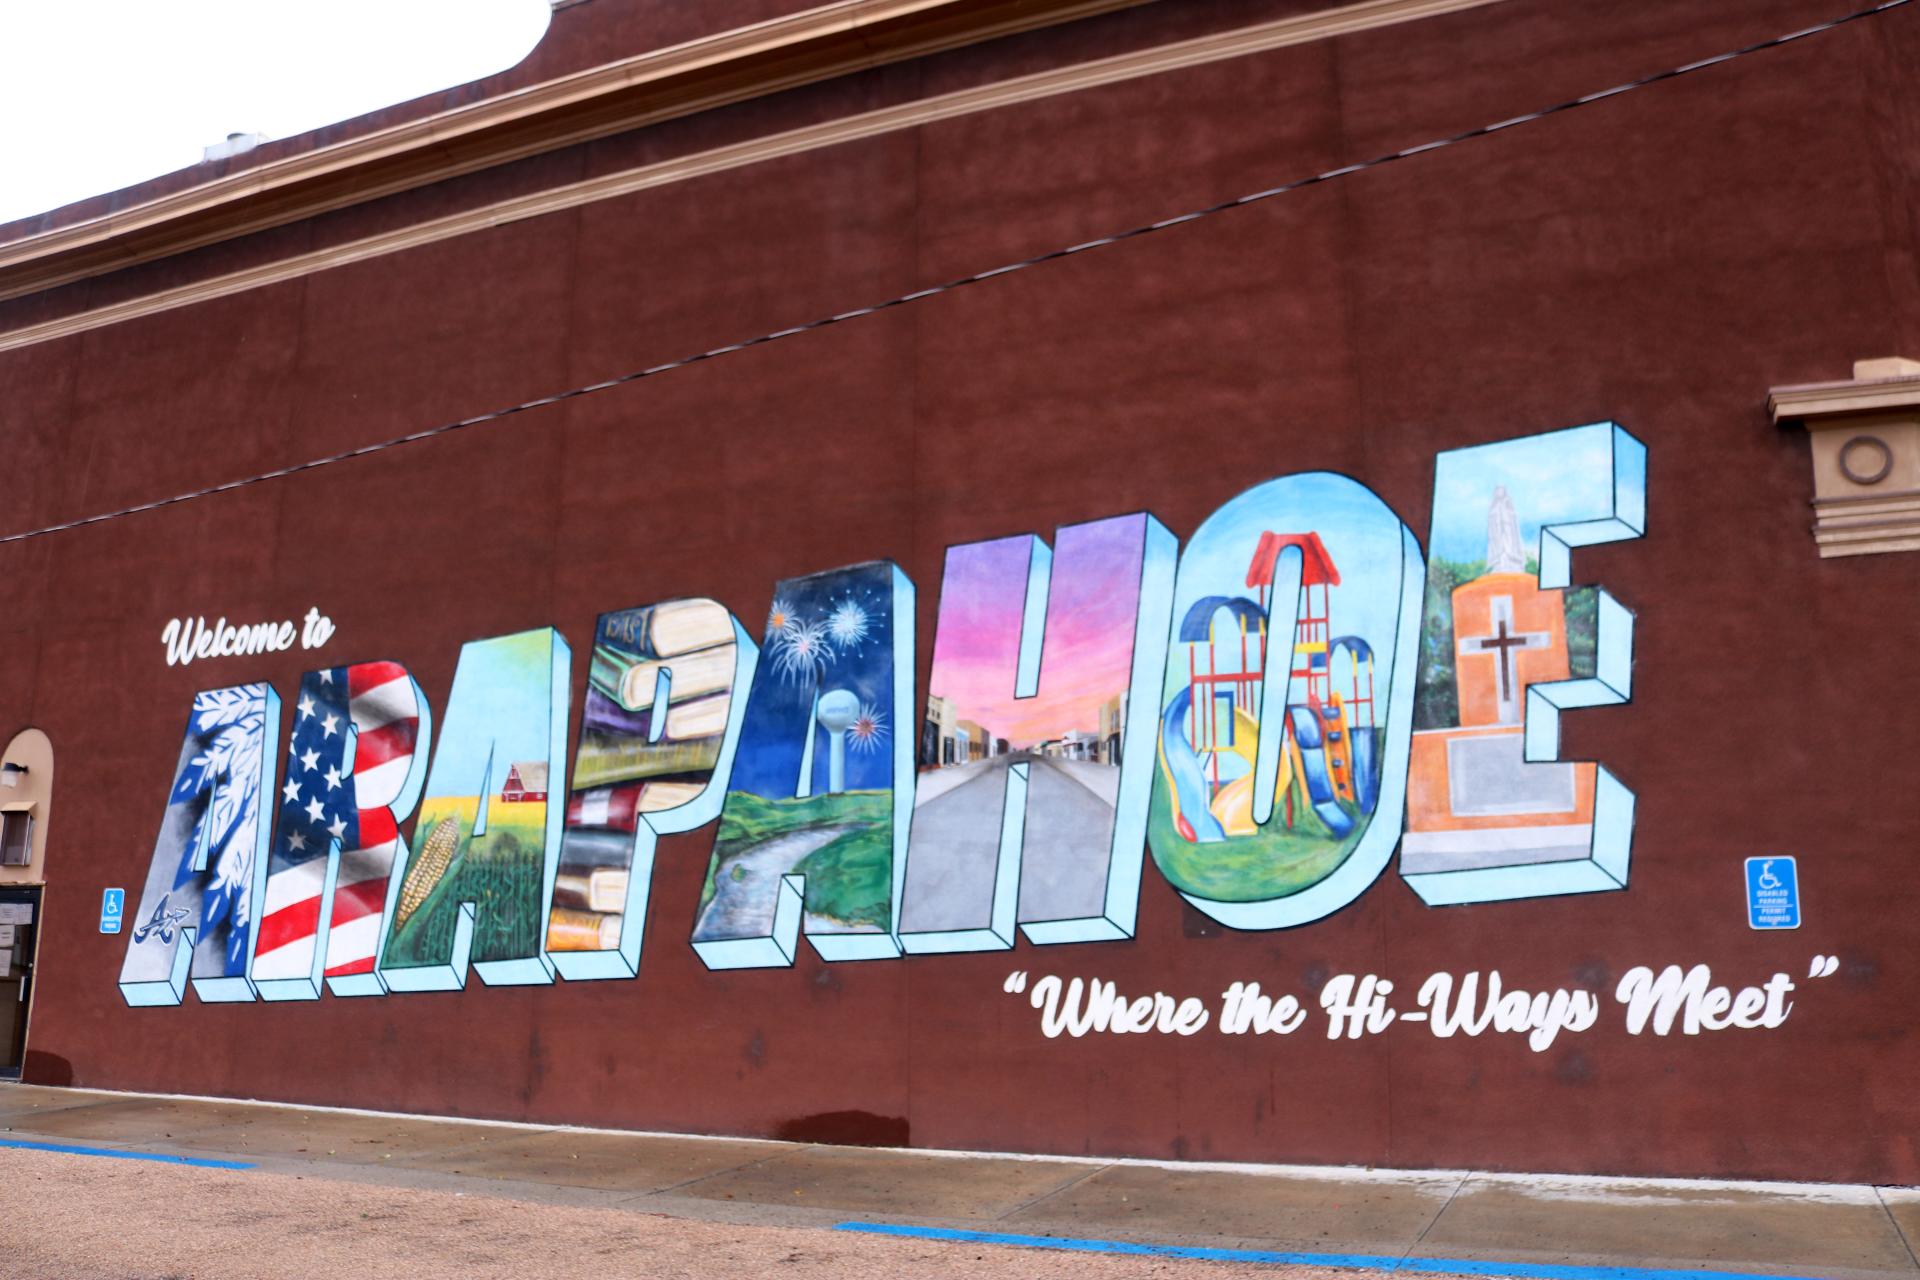 In 2020, fellows Aline Abayo and Megan Tofflemire commissioned a mural in Arapahoe that displays landmarks unique to the area.